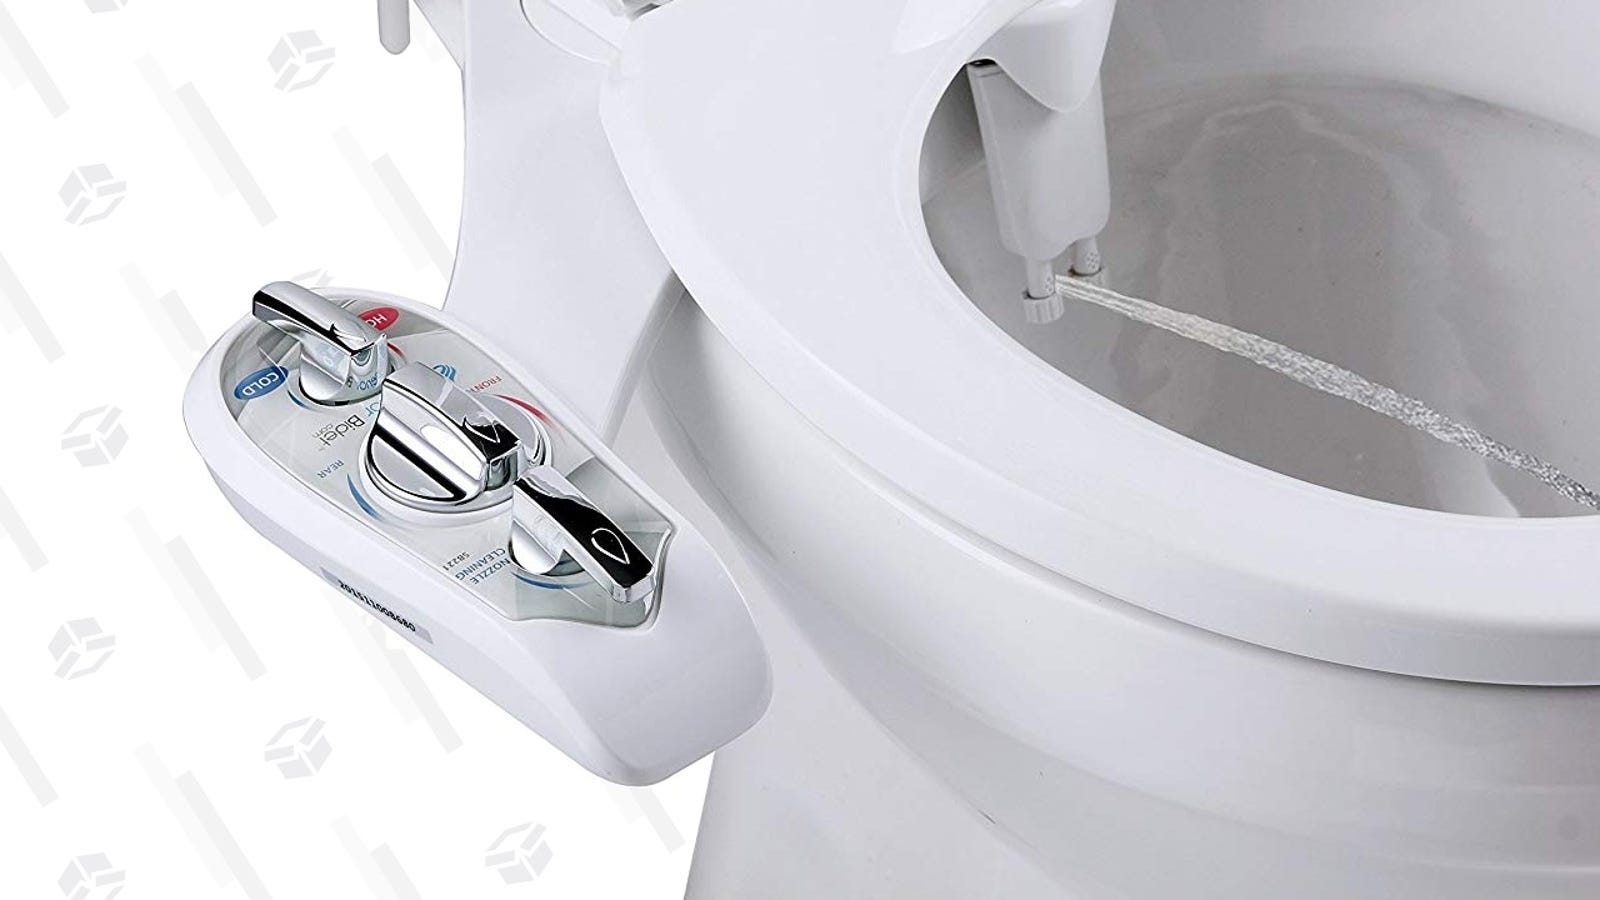 photo of This $40 Bidet Includes Hot Water Support, Which Your Tush Will Appreciate This Time of Year image